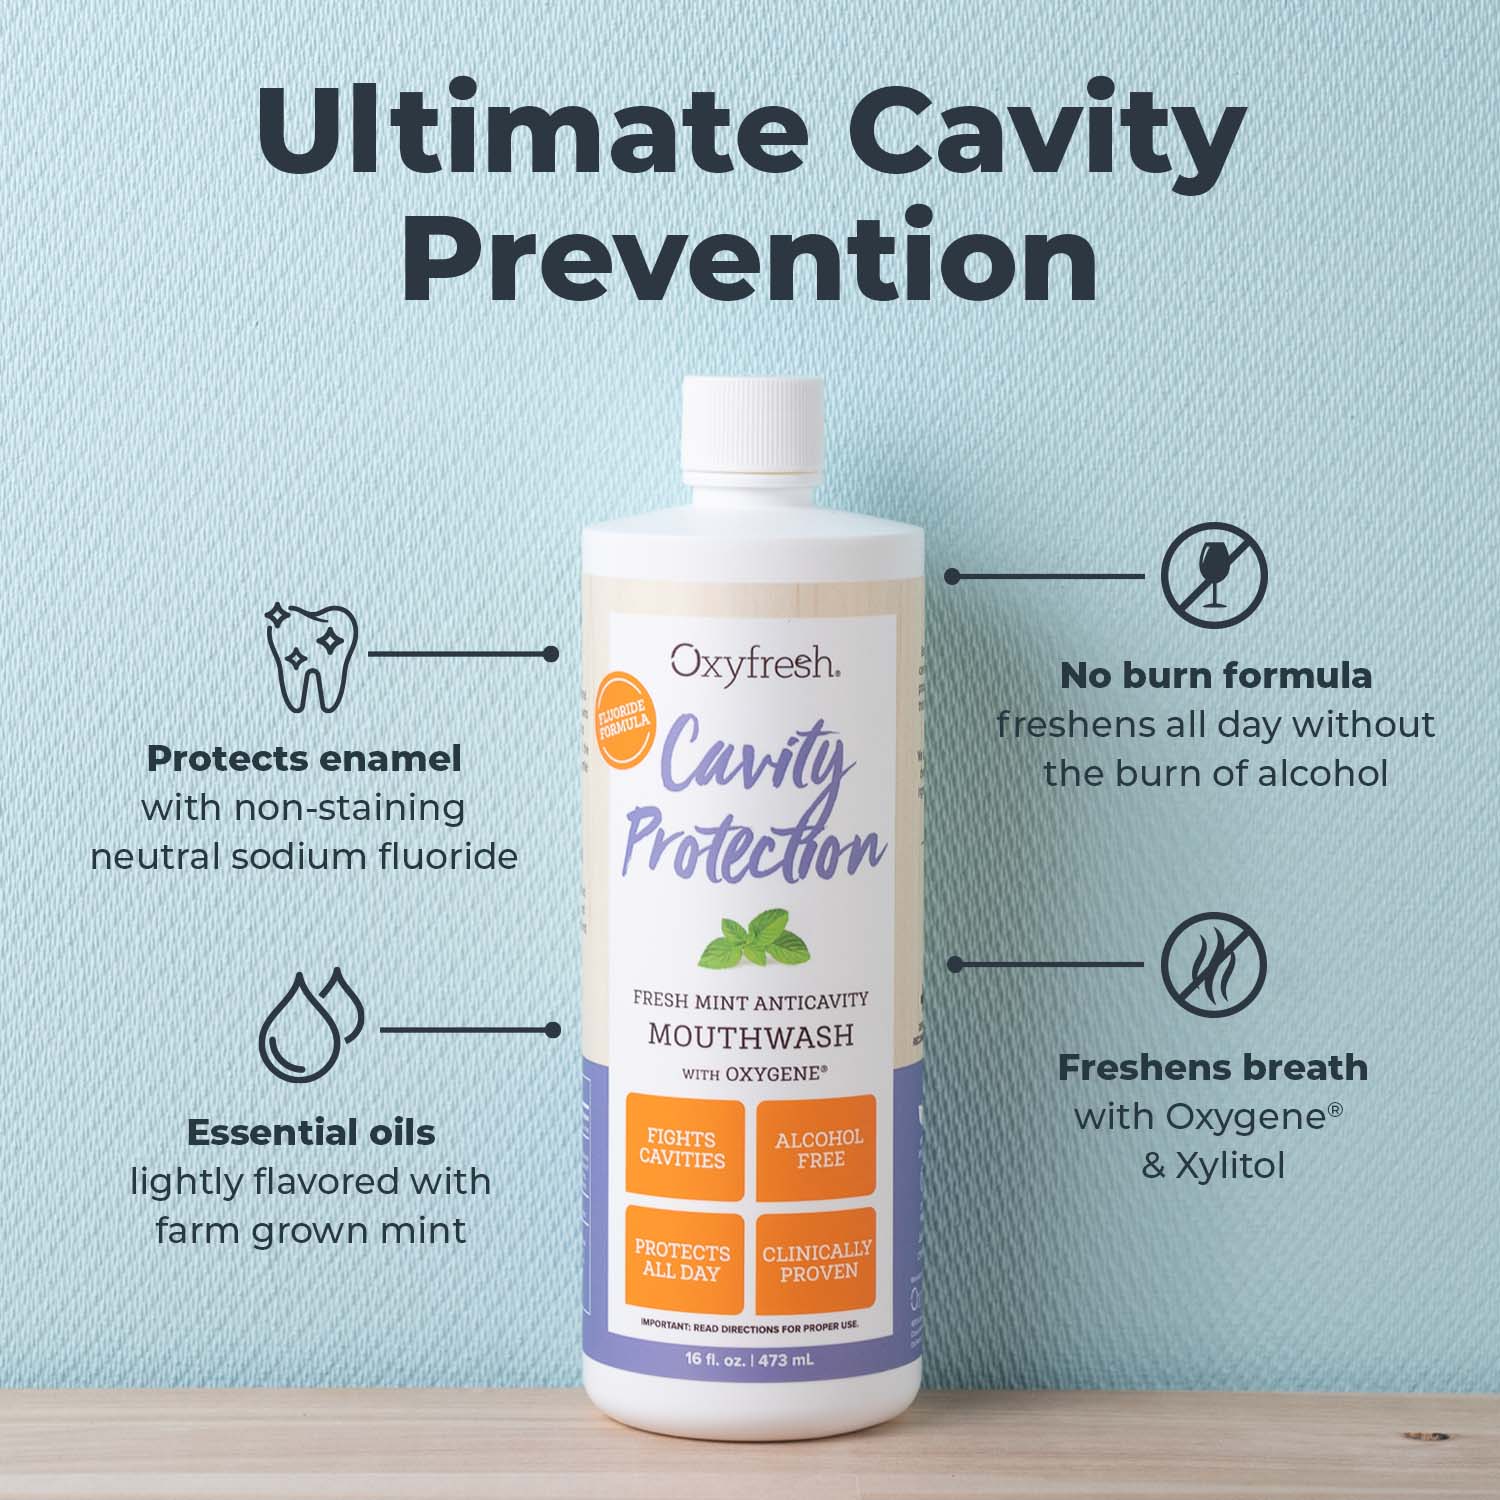 oxyfresh-cavity-protection-fluoride-mouthwash-with-no-burn-formula-essential-oils-freshens-breath-and-protects-enamel